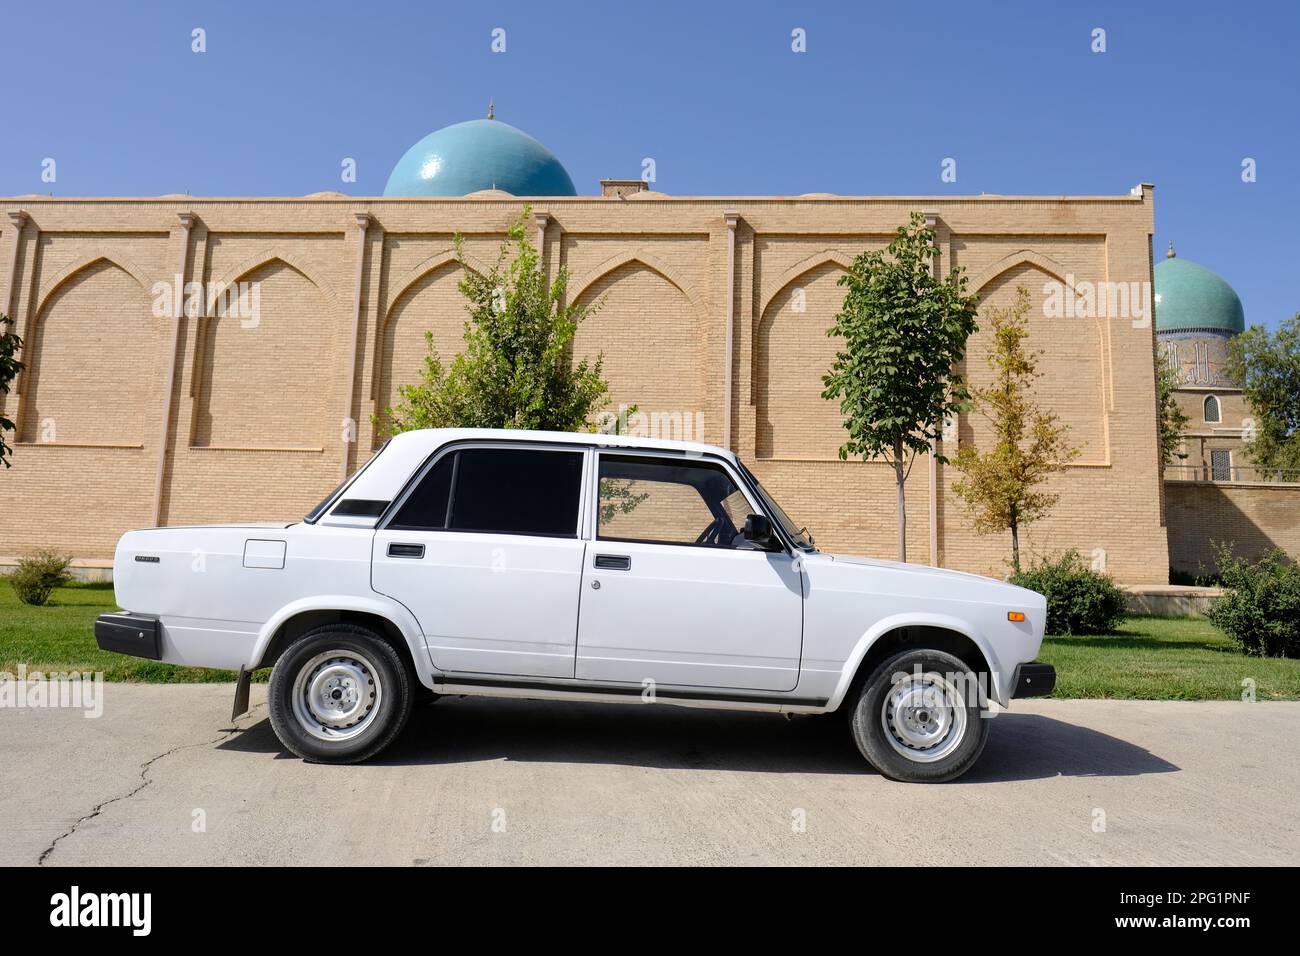 Russian made Lada 2107 car parked near a mosque in Uzbekistan in August 2022 Stock Photo